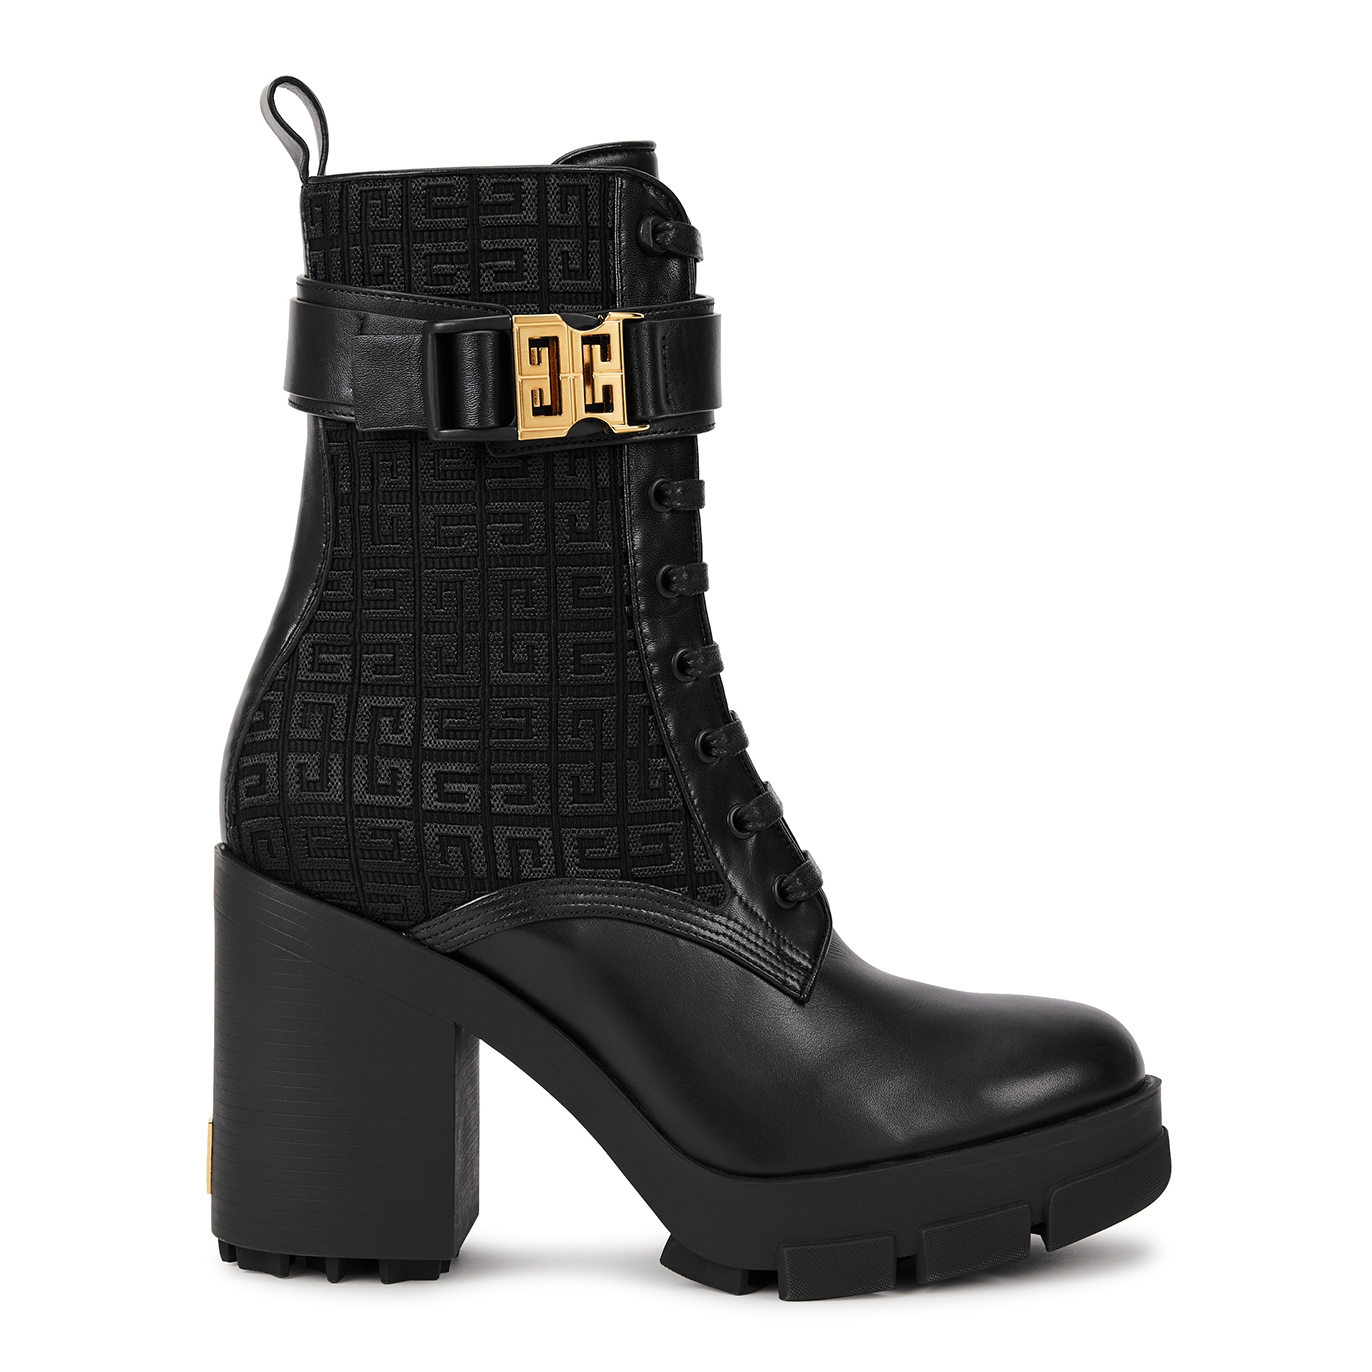 Givenchy Terra 100 Leather Ankle Boots - Black - 4